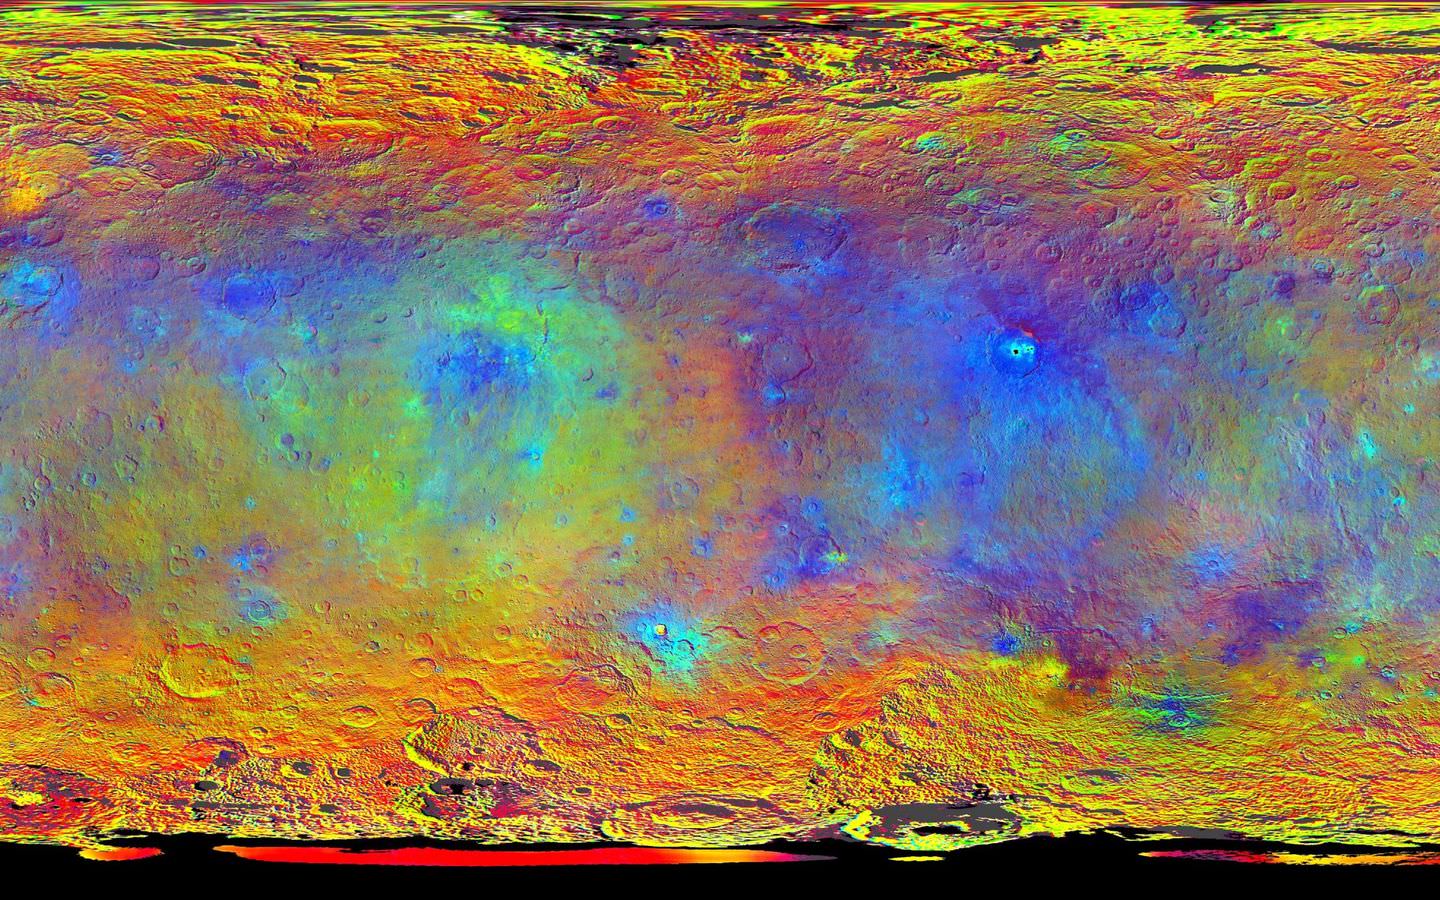 This map-projected view of Ceres was created from images taken by NASA's Dawn spacecraft during its high-altitude mapping orbit, in August and September, 2015.  This color coded map can provide valuable insights into the mineral composition of the surface, as well as the relative ages of surface features.  Credits: NASA/JPL-Caltech/UCLA/MPS/DLR/IDA